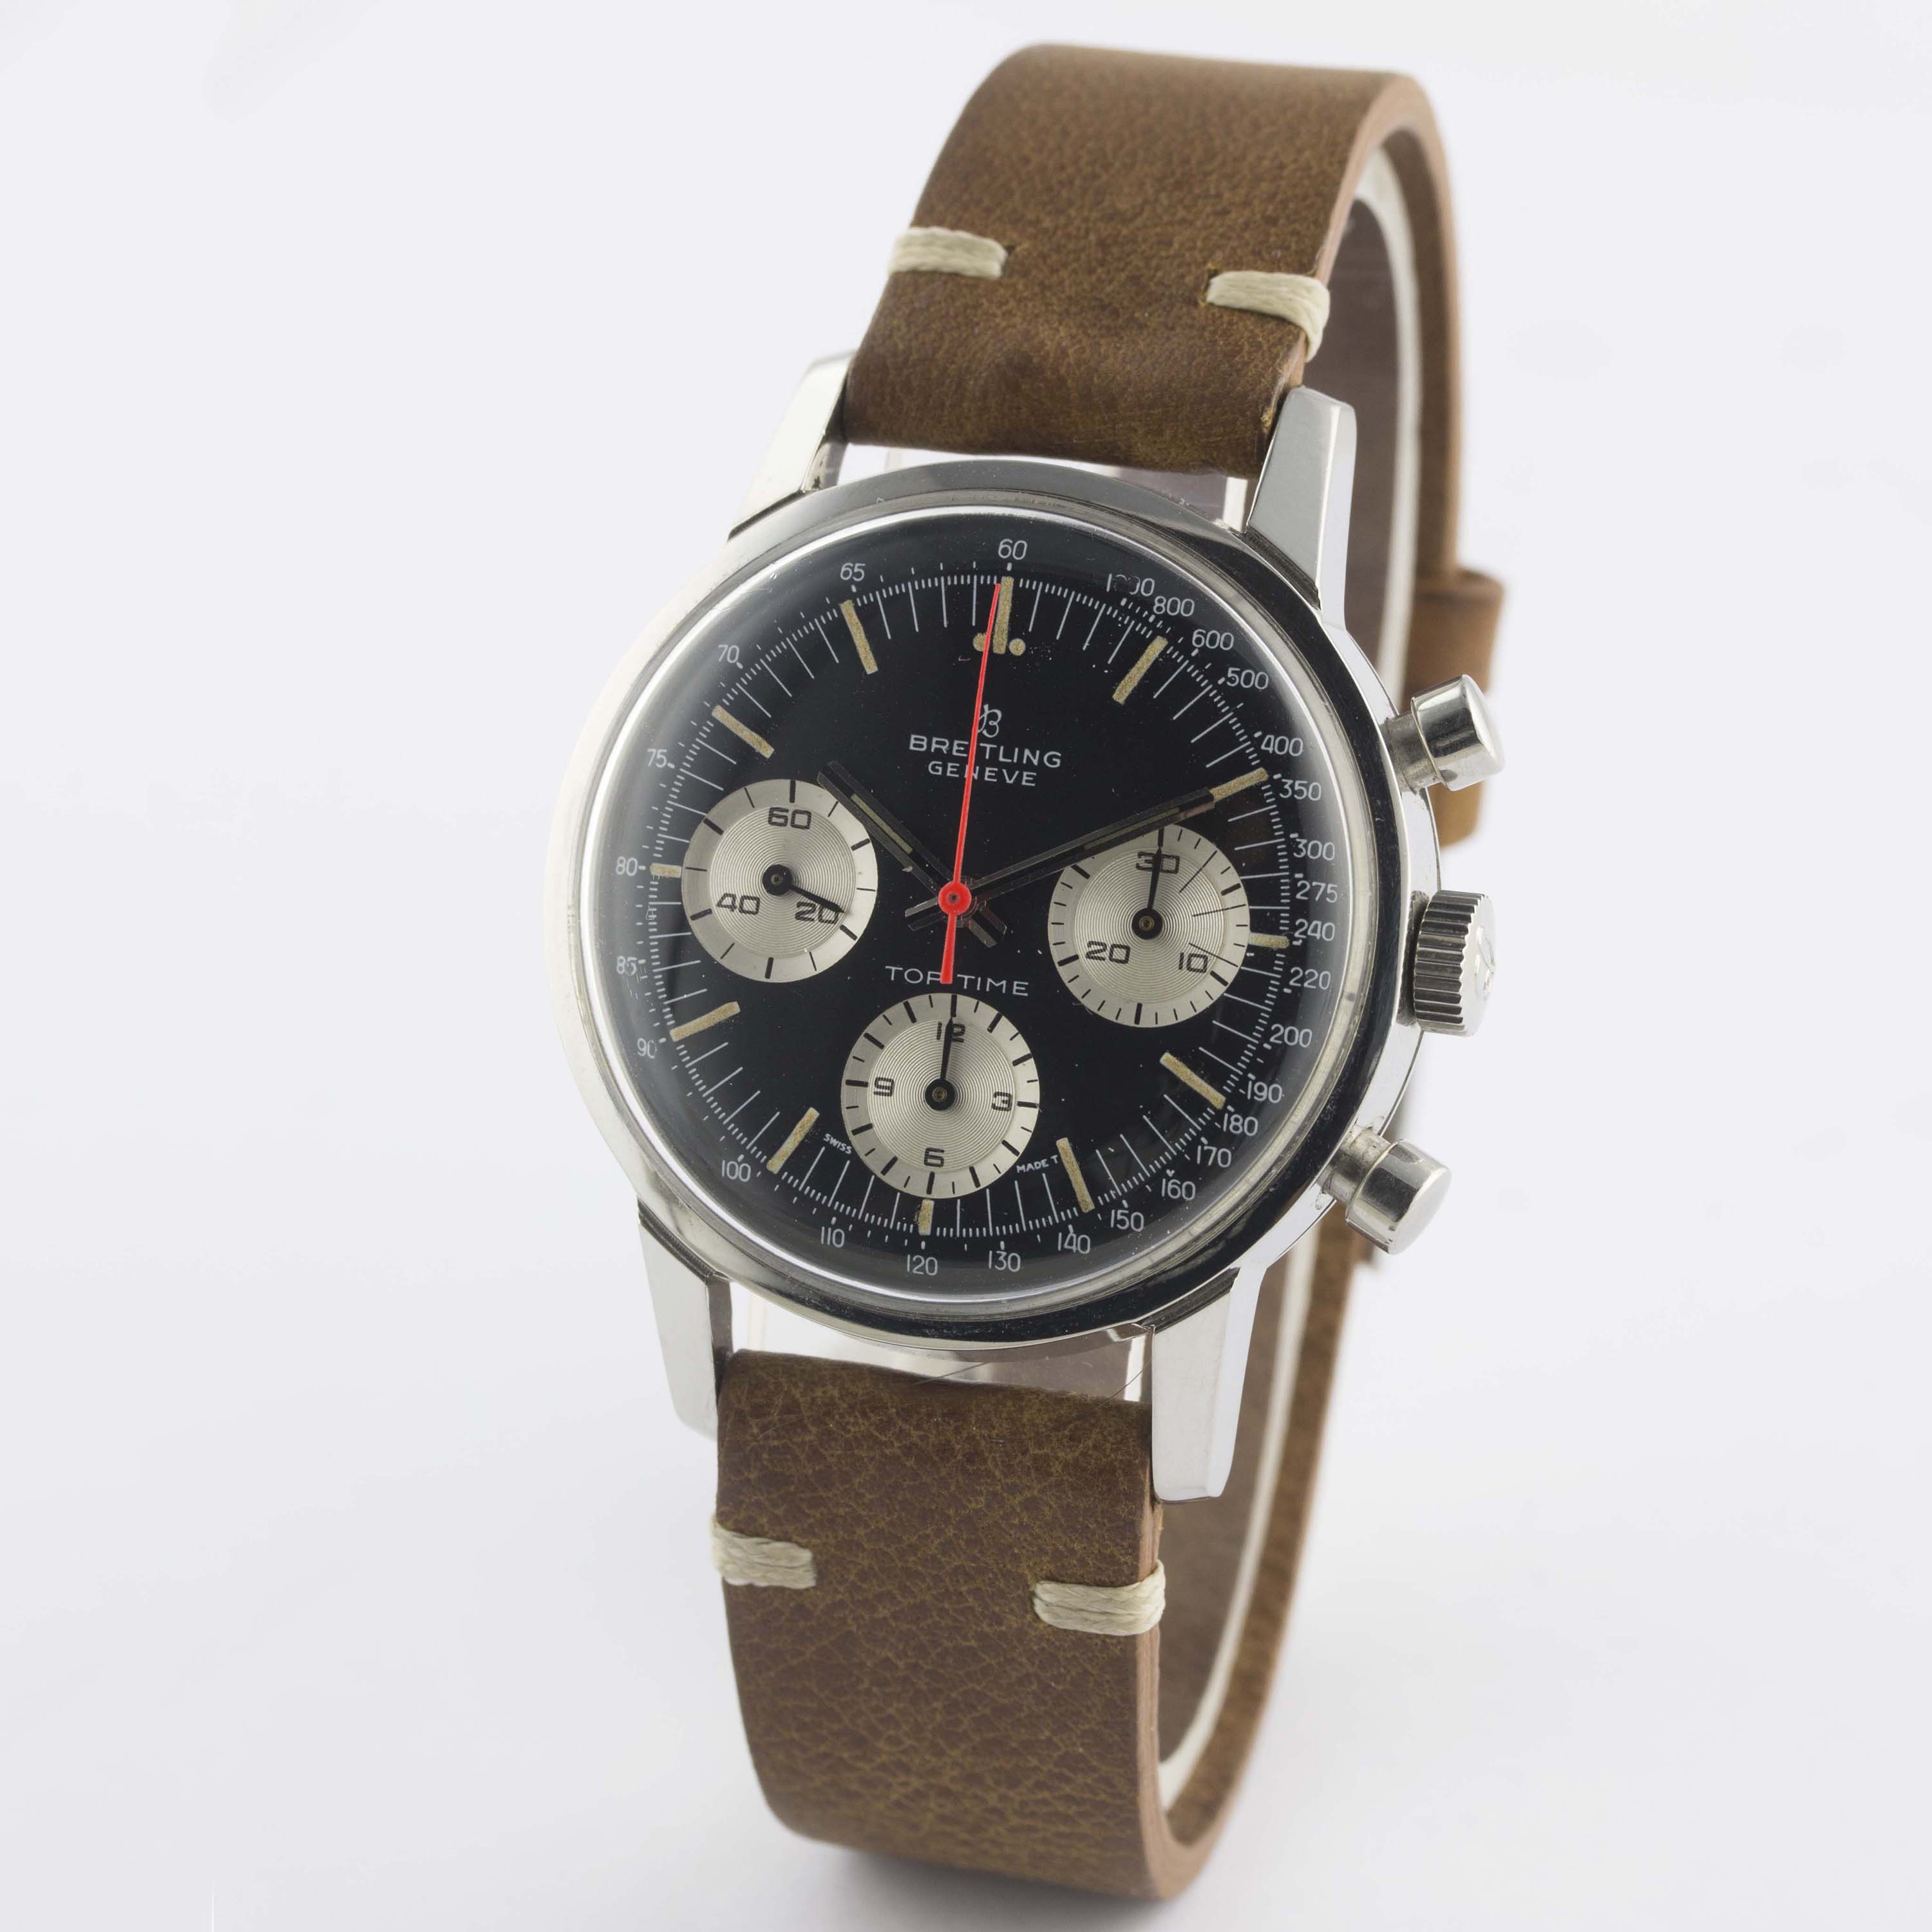 A RARE GENTLEMAN'S STAINLESS STEEL BREITLING TOP TIME CHRONOGRAPH WRIST WATCH CIRCA 1969, REF. 810 - Image 5 of 11